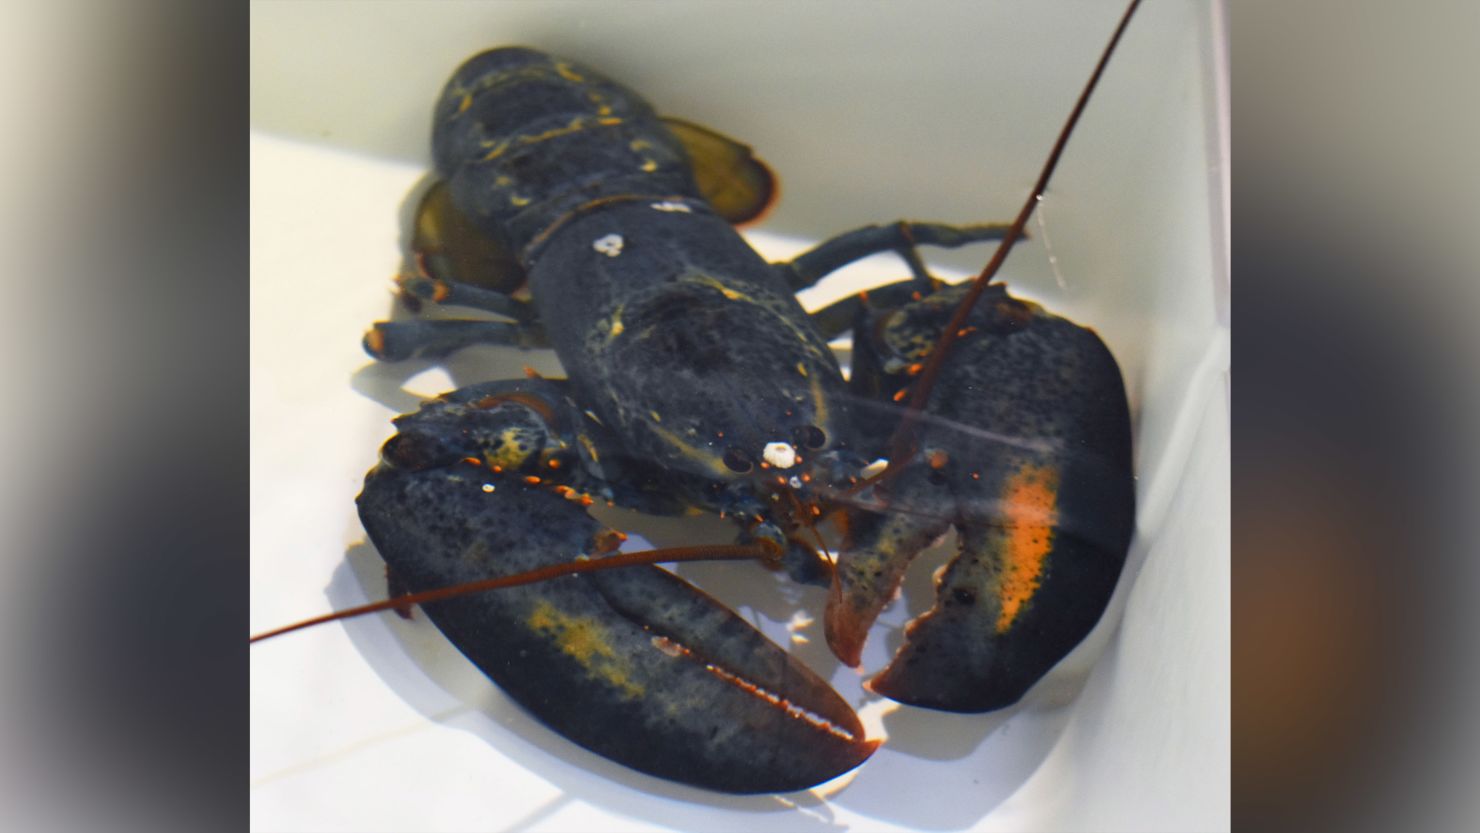 The Akron Zoo landed a rare find recently, adopting a blue lobster from a nearby Red Lobster after restaurant employees recognized the rarity of the blue shell.